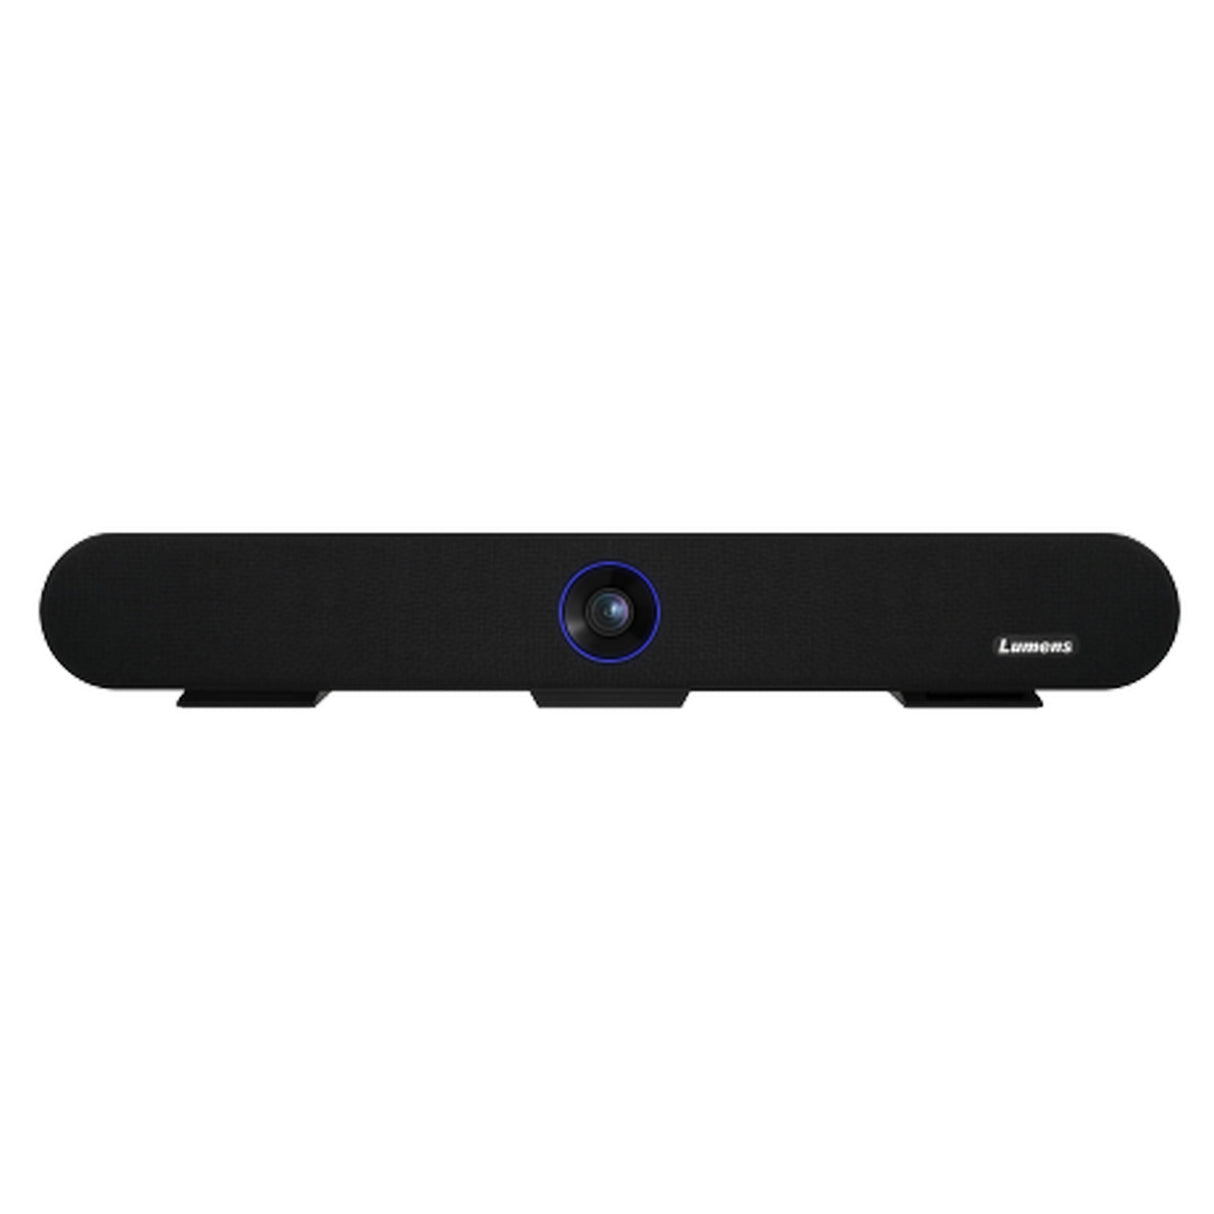 Lumens MS-10 All-In-One 4K Video Conferencing Solution with Auto-Framing Camera